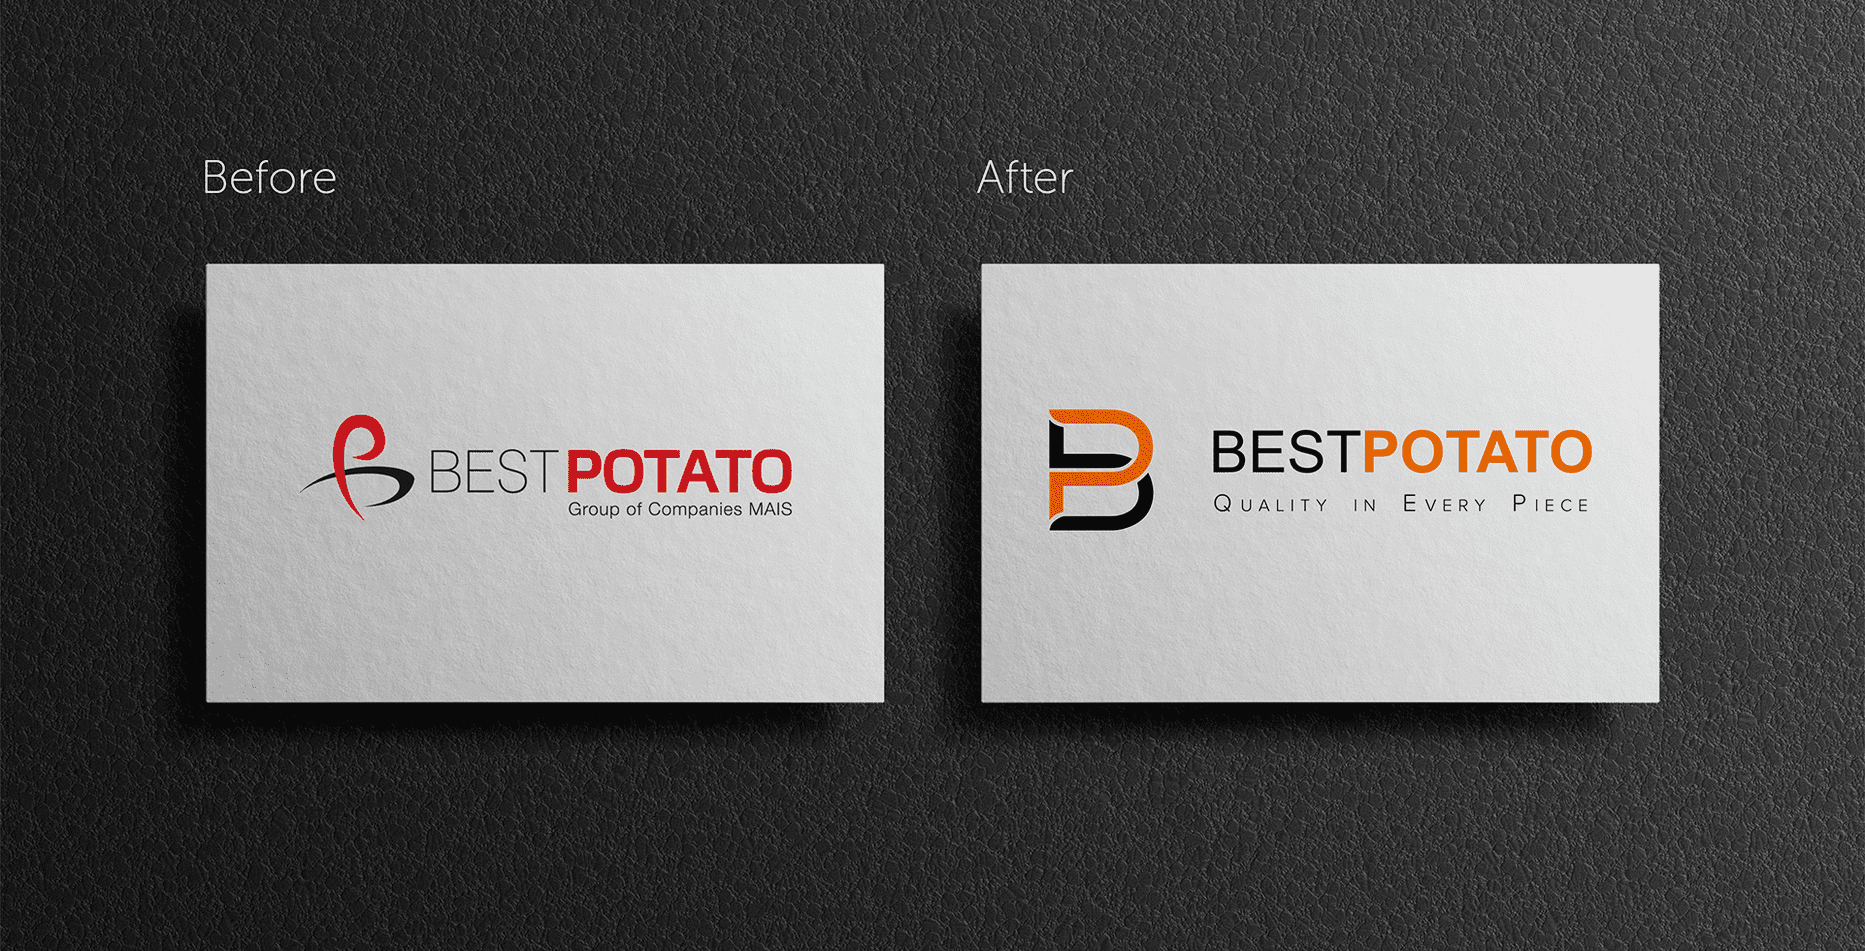 Case: brand positioning and logo redesign for Best Potato — Rubarb - Image - 3